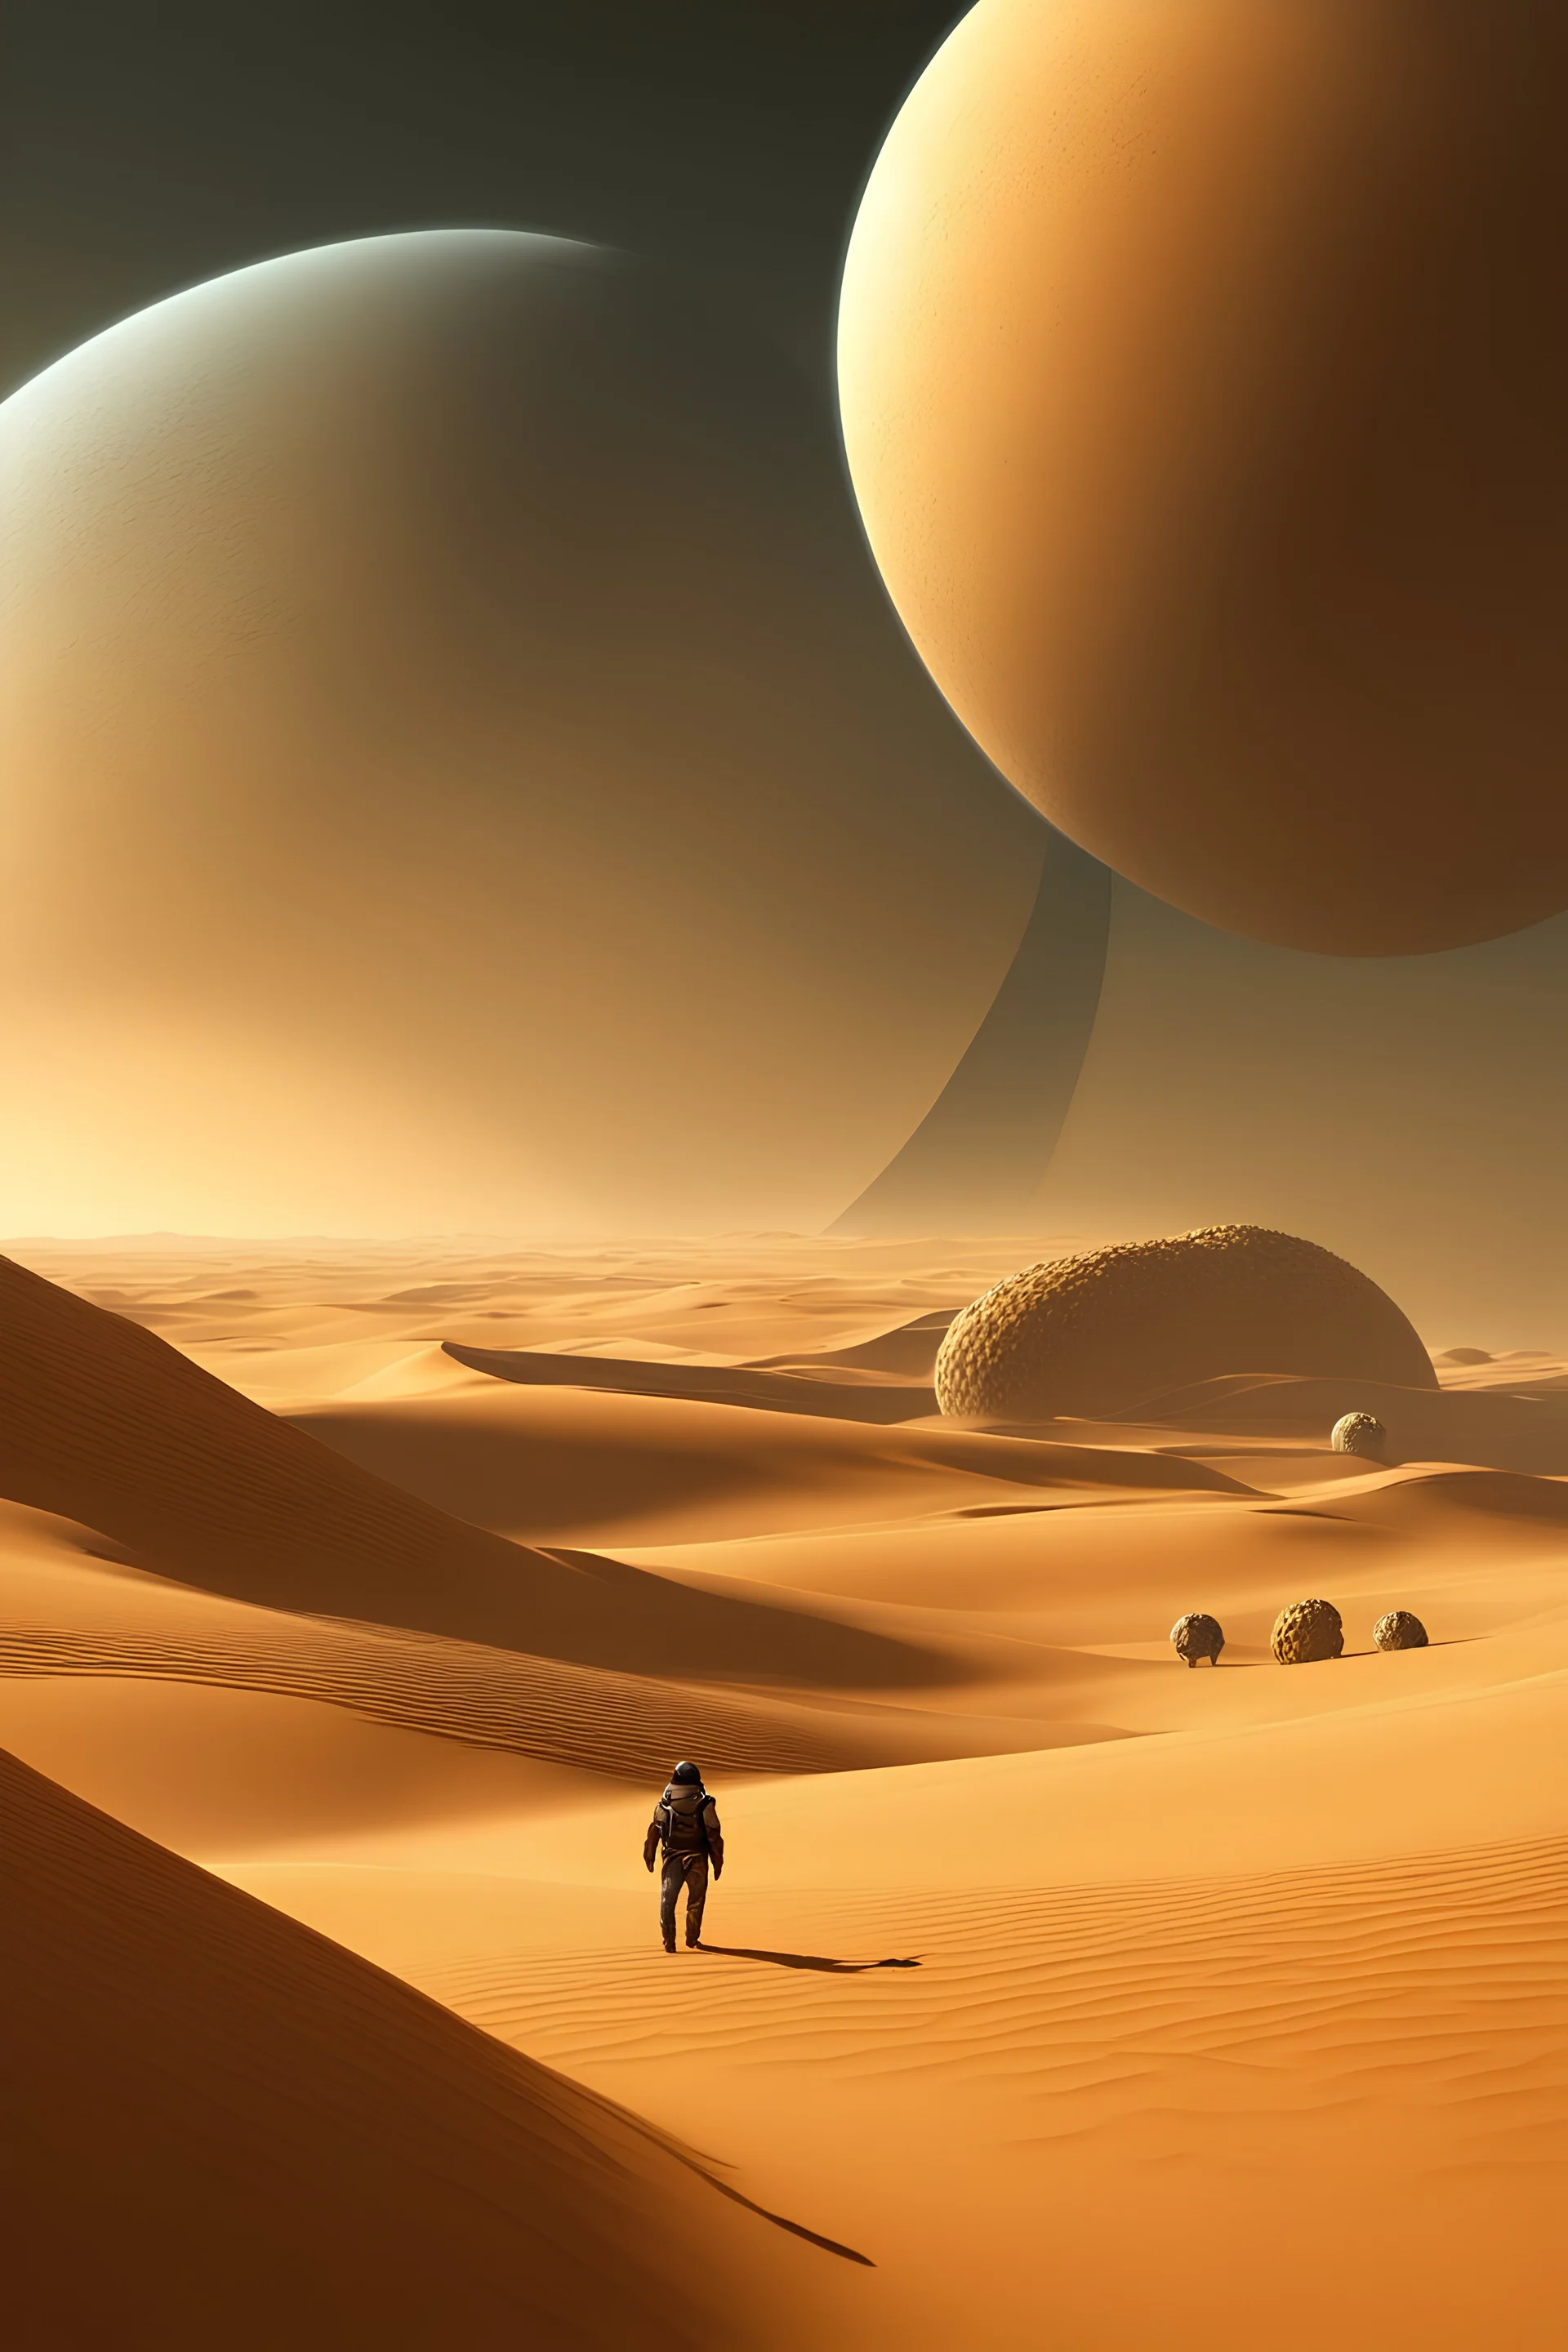 Dune-Desert Planet Arrakis: Image of a barren, sandy desert planet with two moons in the sky, conveying the harsh environment of Arrakis., Alexandro Jodorowsy Art,Juan Gimenez Art,Space Art,Sci-Fic Art,Dark Influence,NijiExpress 3D v2,Kinetic Art,Datanoshing,Oil painting,Ink v3,Splash style,Abstract Art,Abstract Tech,CyberTech Elements,Futuristic,Epic style,Illustrated v3,Deco Influence,Air Brush style,drawing